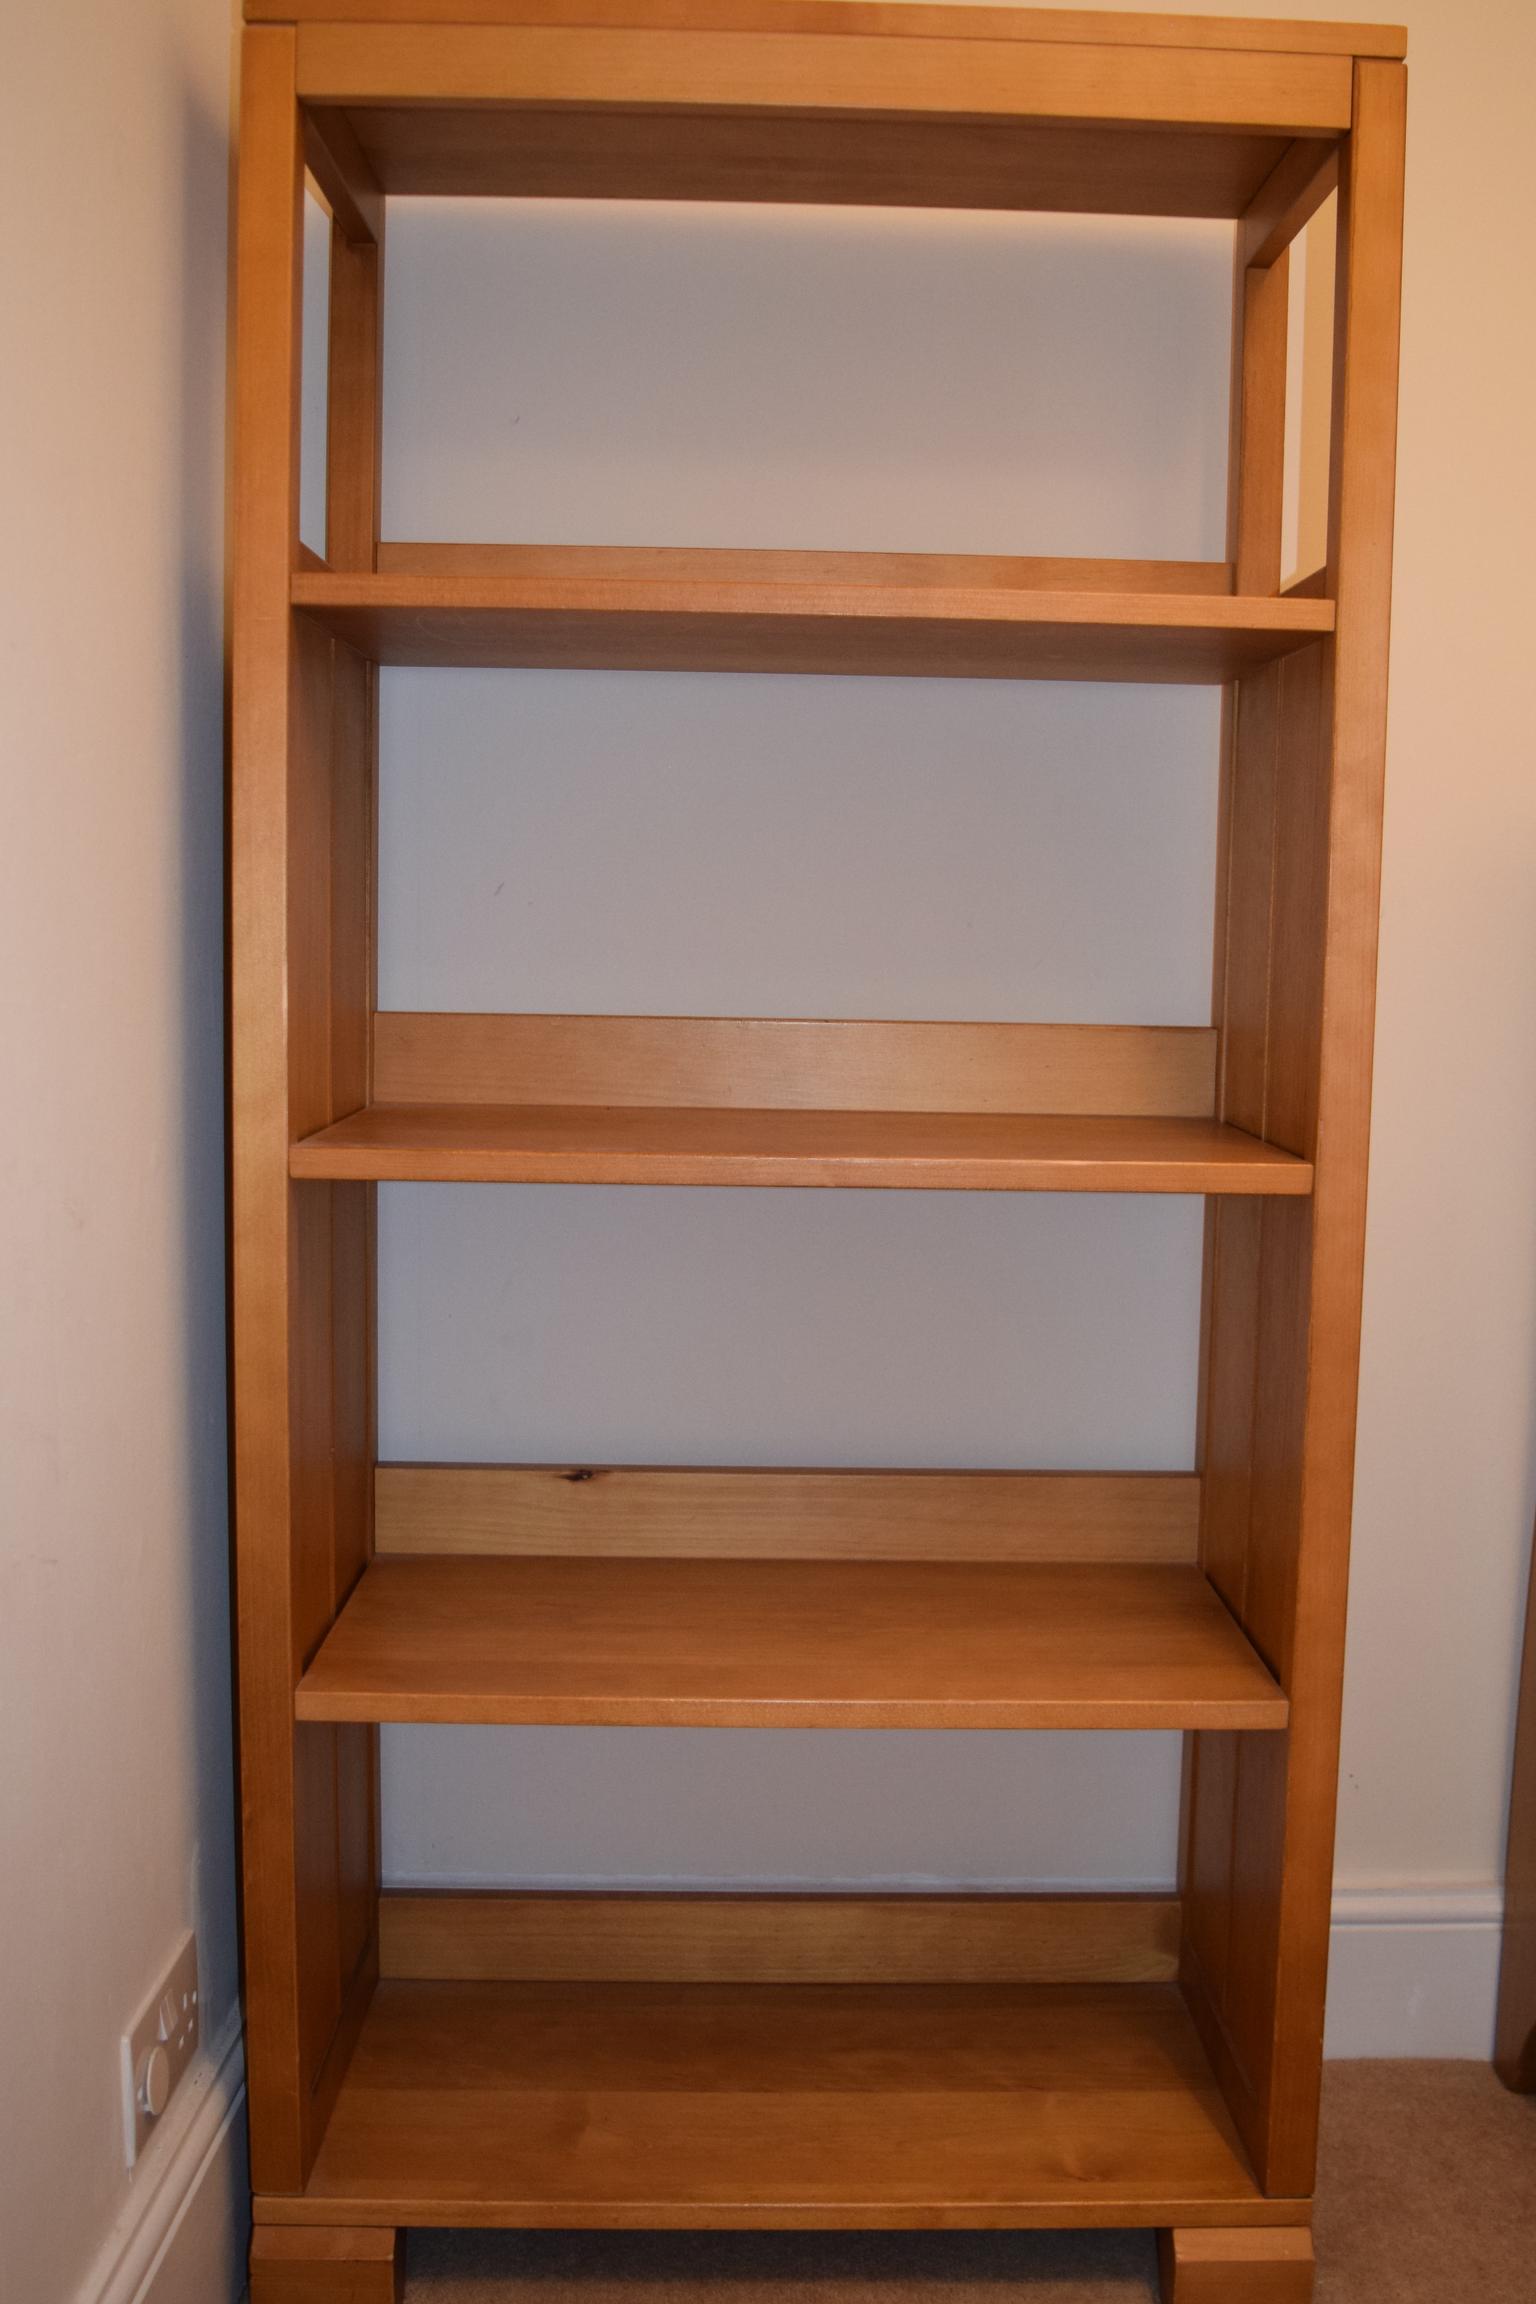 Boori King Parrot Cotbed And Bookcase In N2 London Fur 125 00